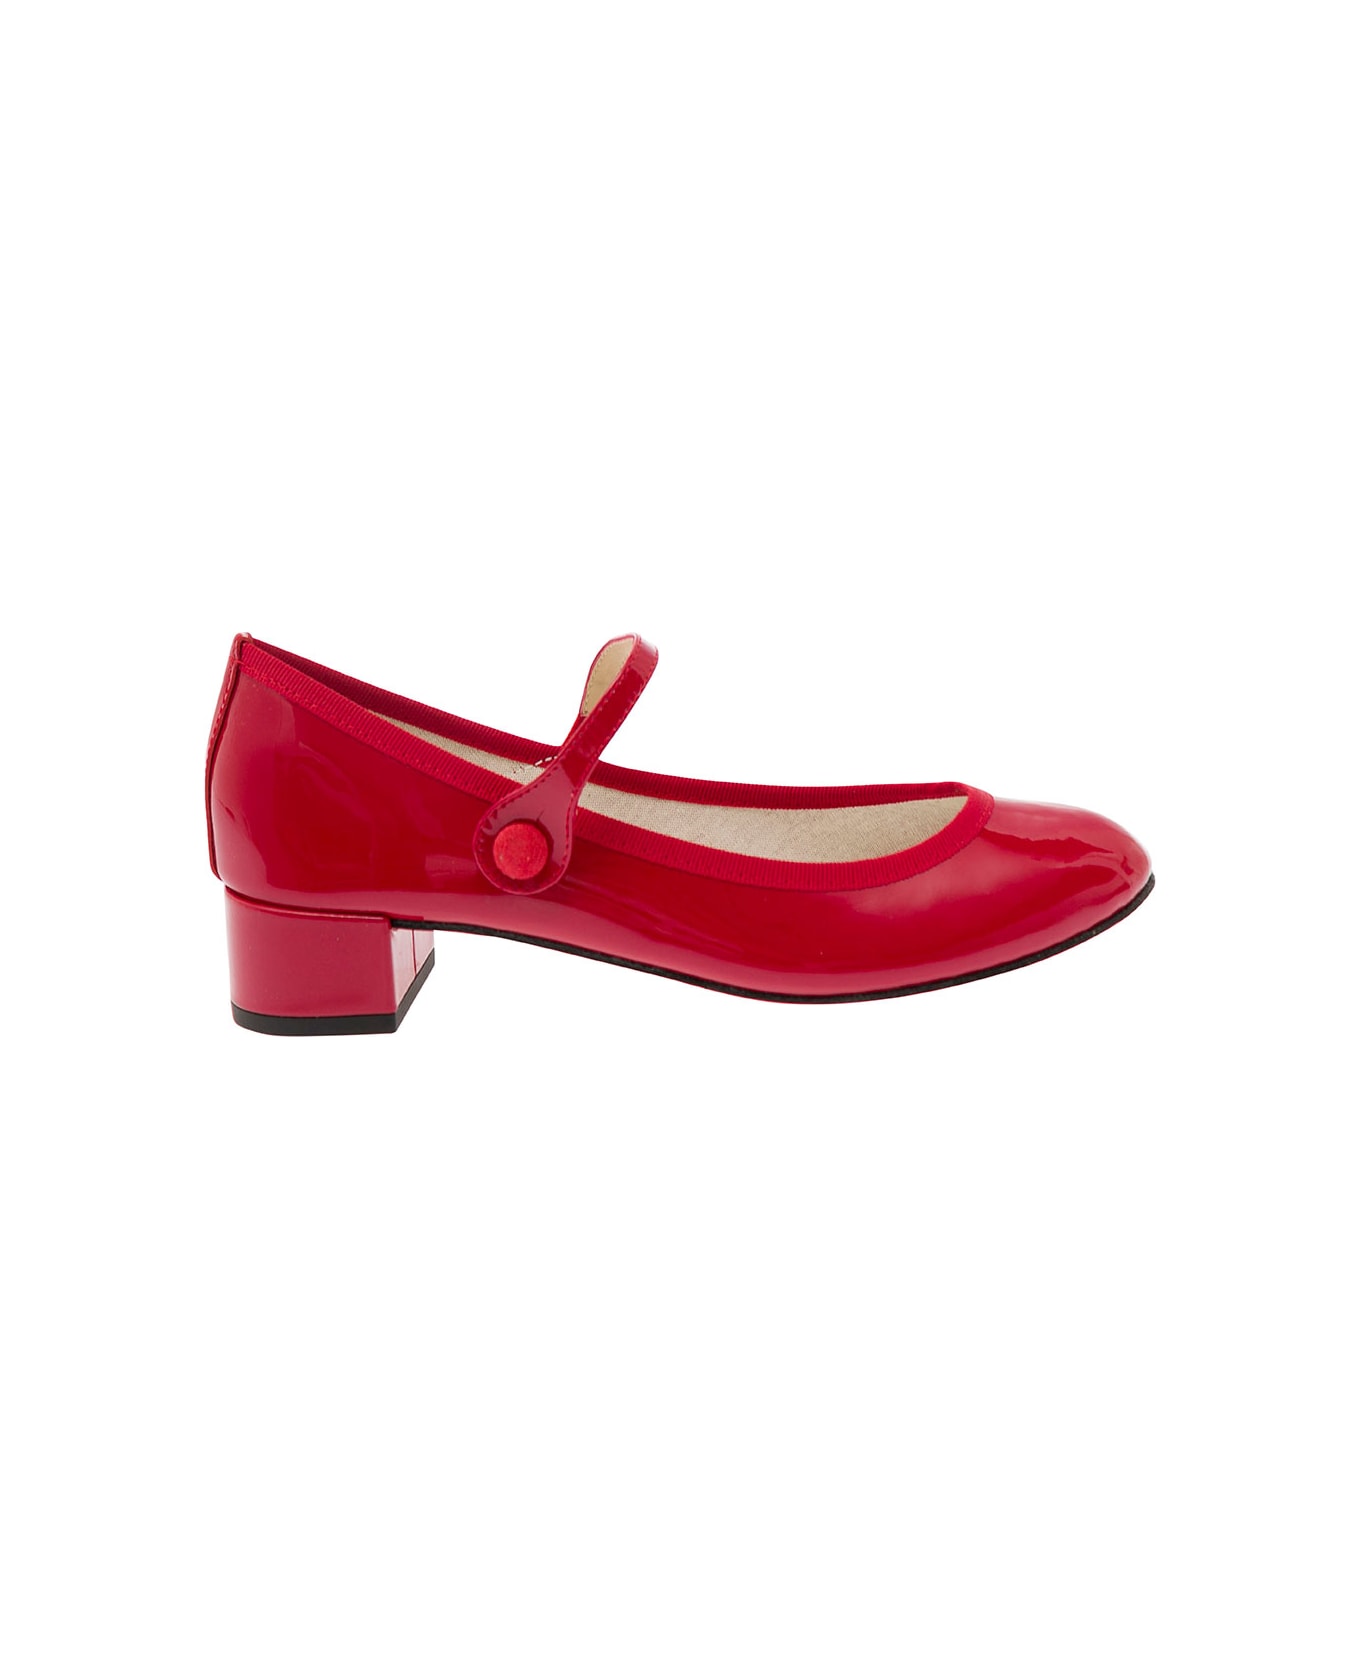 Repetto 'rose' Red Mary Janes With Strap In Patent Leather Woman - Red ハイヒール